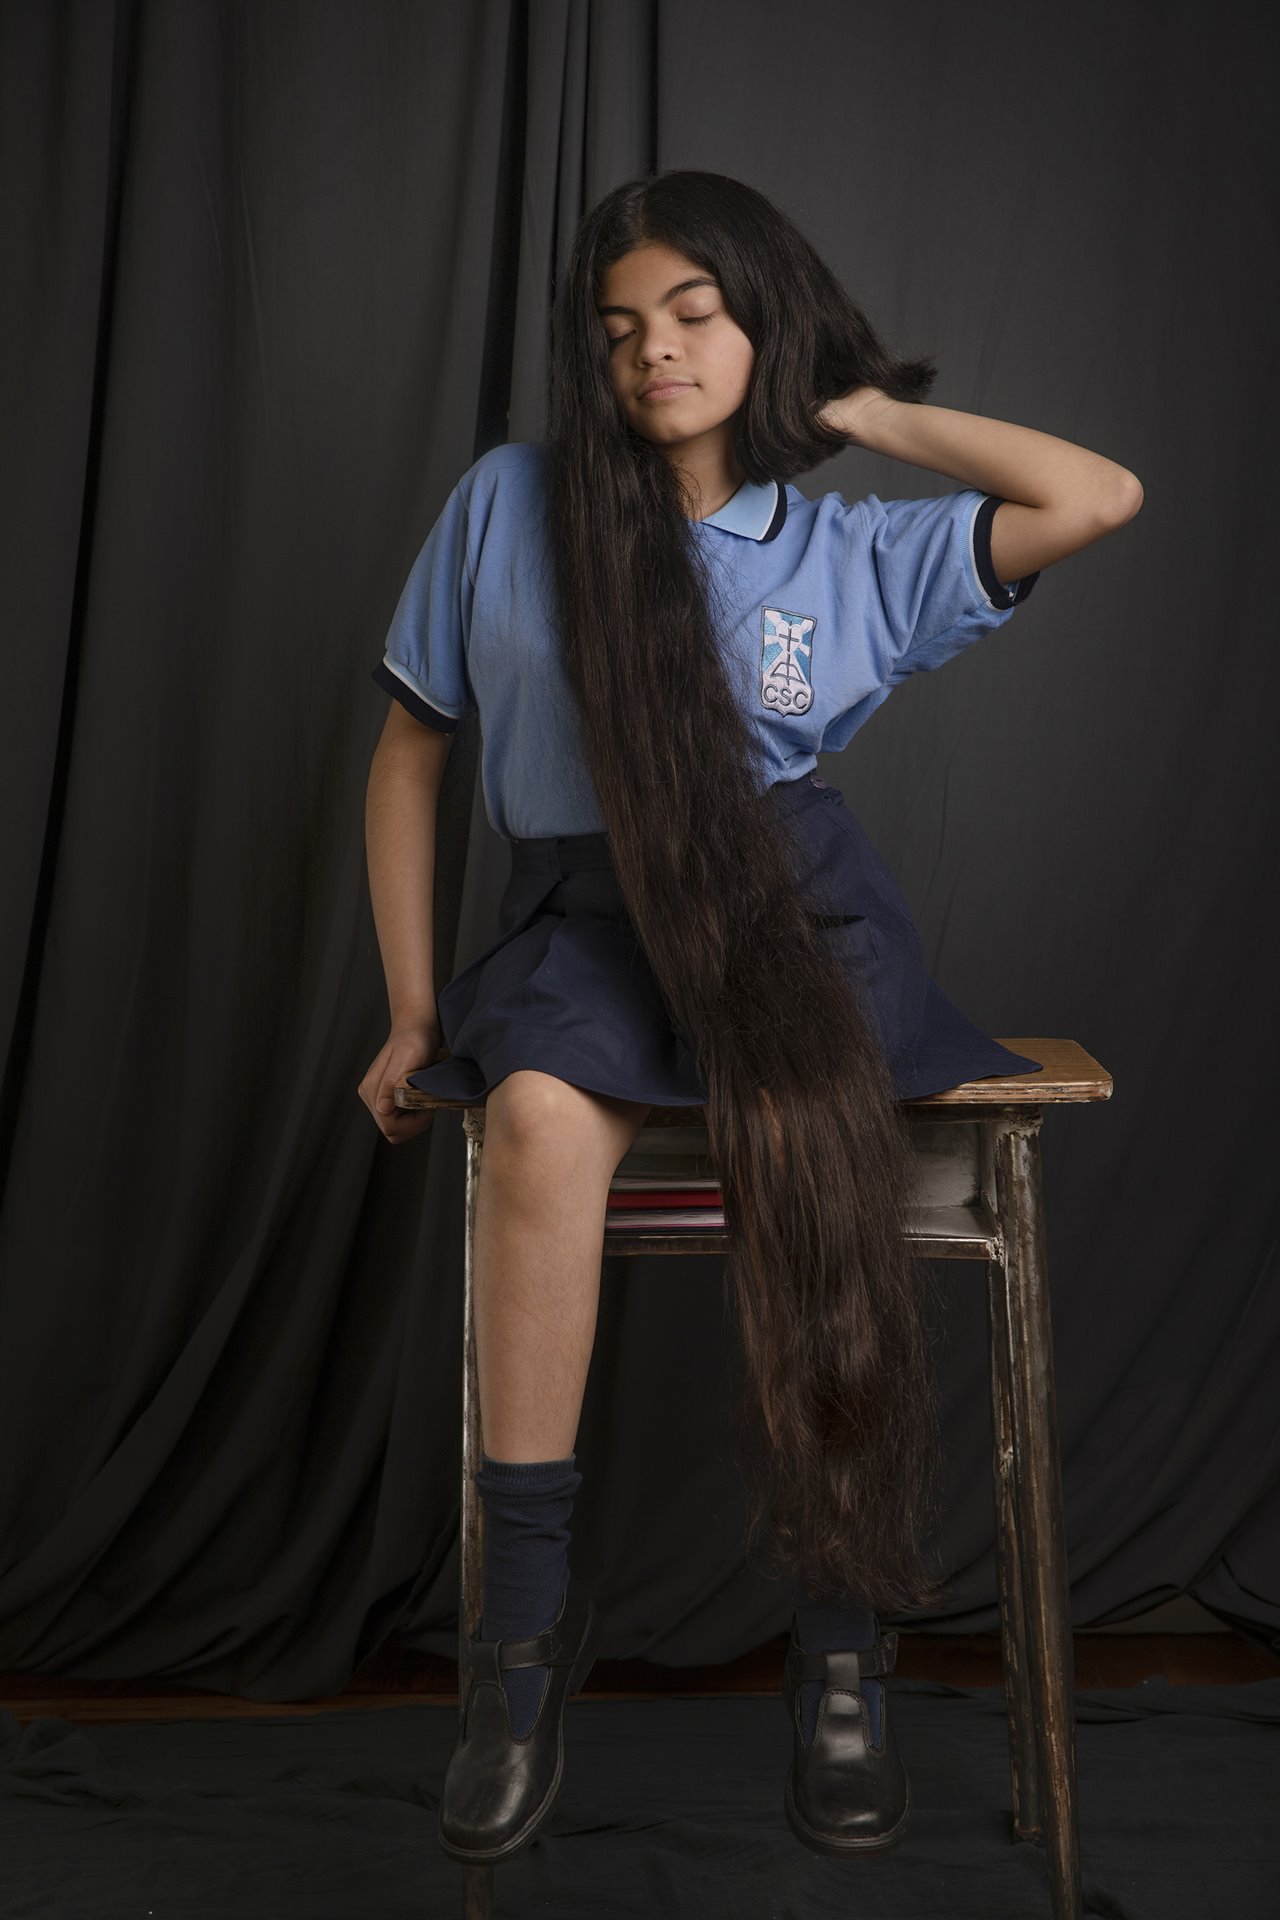 Antonella poses for a portrait after half her hair has been cut, in Buenos Aires, Argentina. Antonella had her hair cut the weekend before she at last returned to full in-person classes after lockdown. Her parents created a small stage with a black backdrop for the occasion.&nbsp;